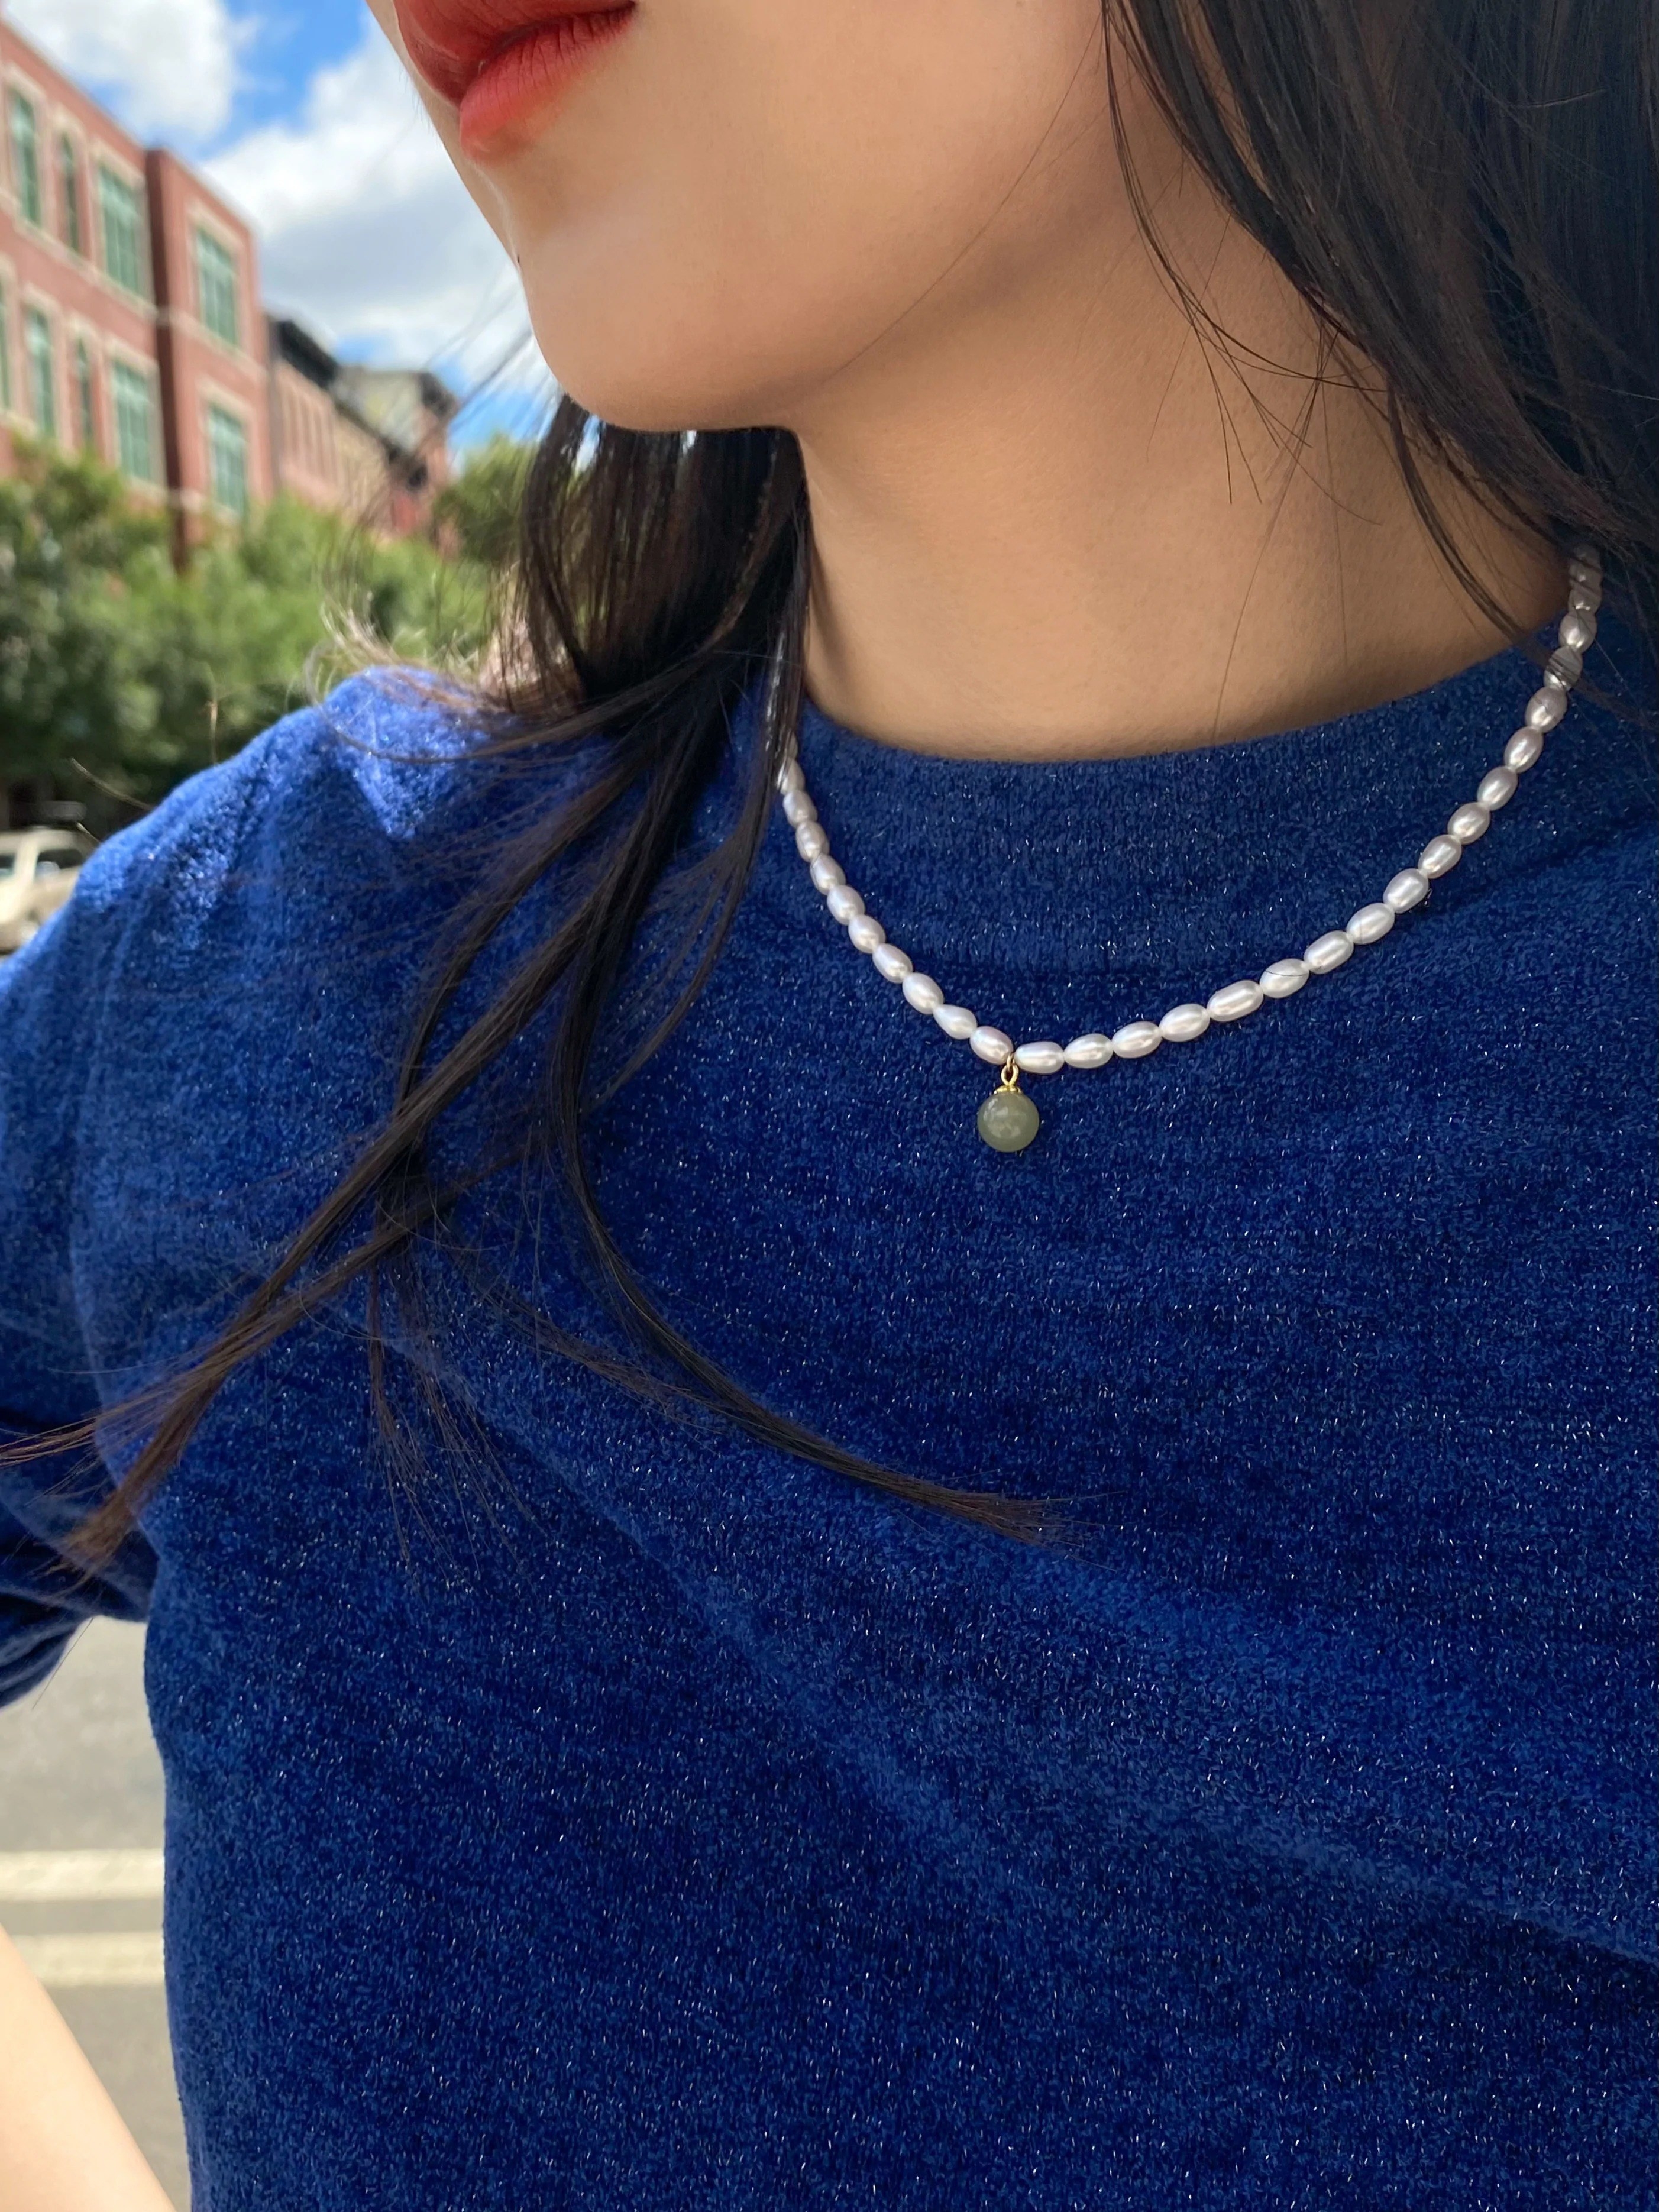 Model wearing blue shirt and pearl choker with green jade attached.